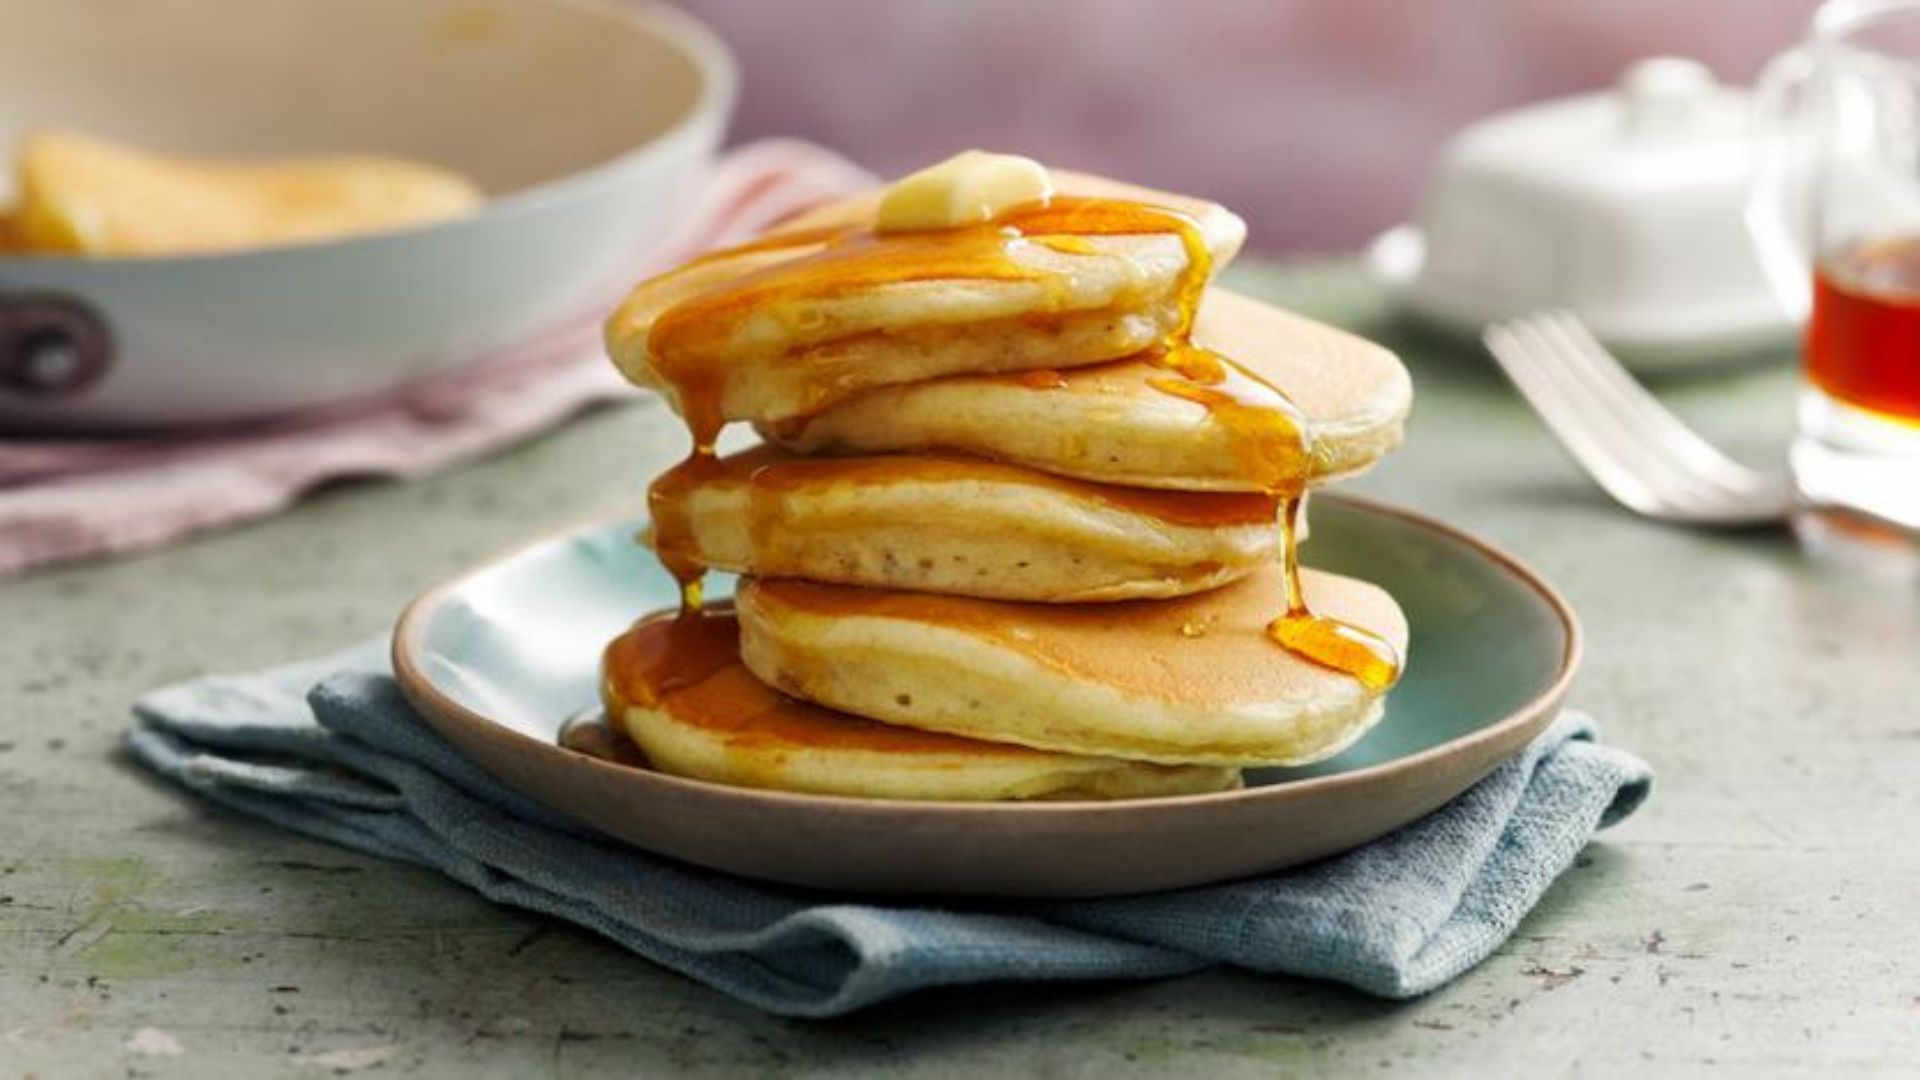 this image shows Fluffy Pancakes